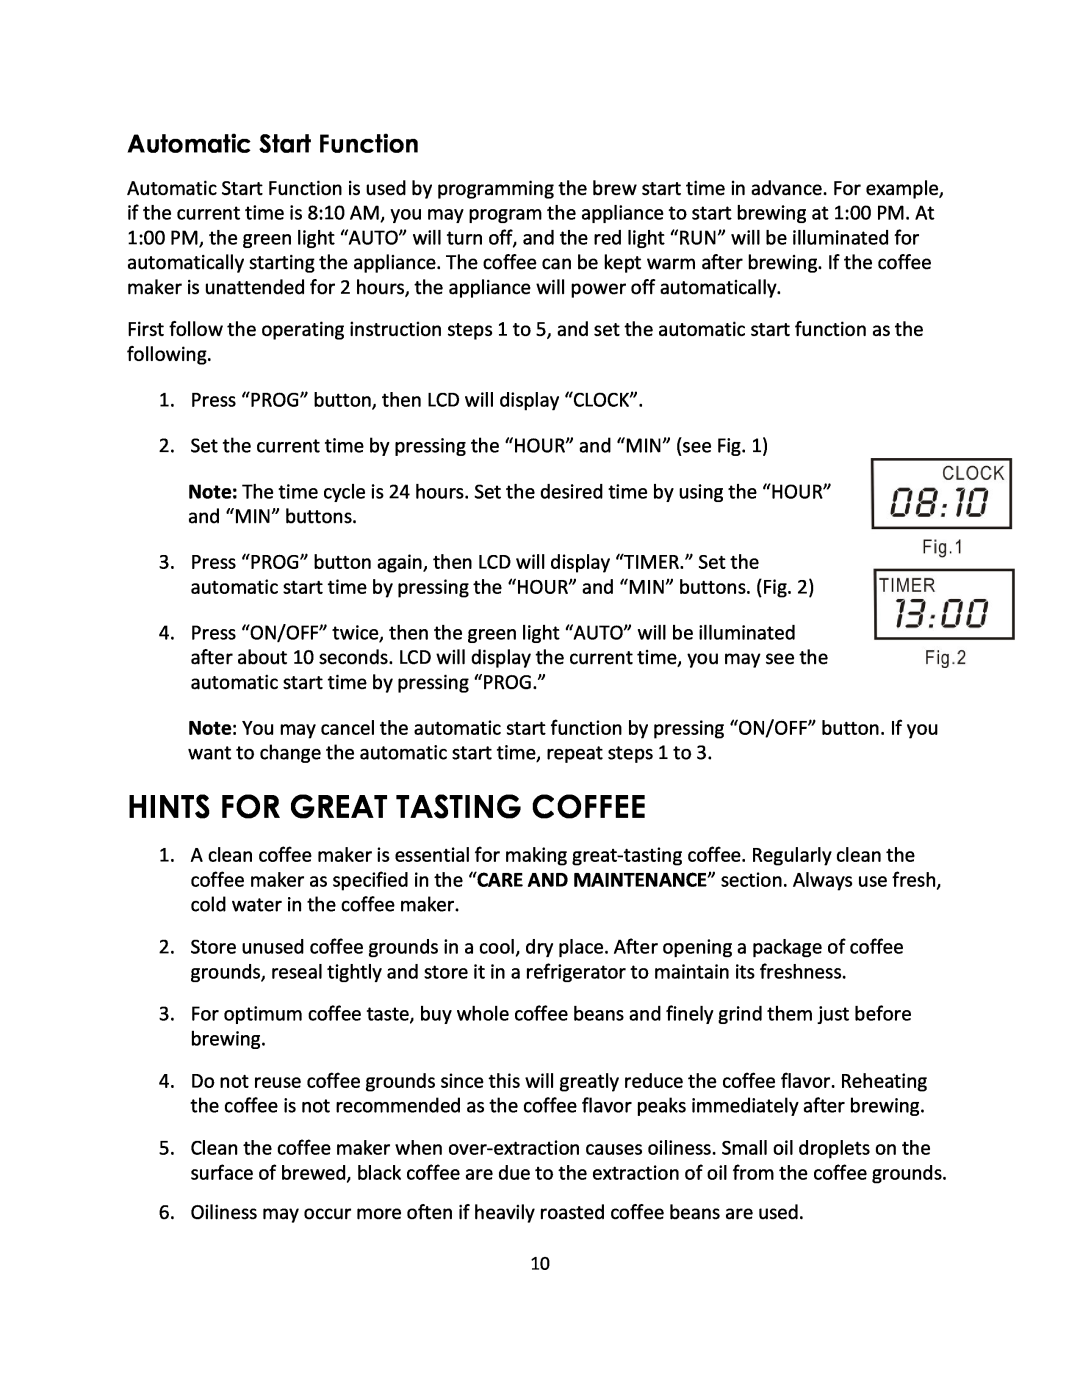 Magic Chef MCSCM12PST instruction manual Hints For Great Tasting Coffee, Automatic Start Function 